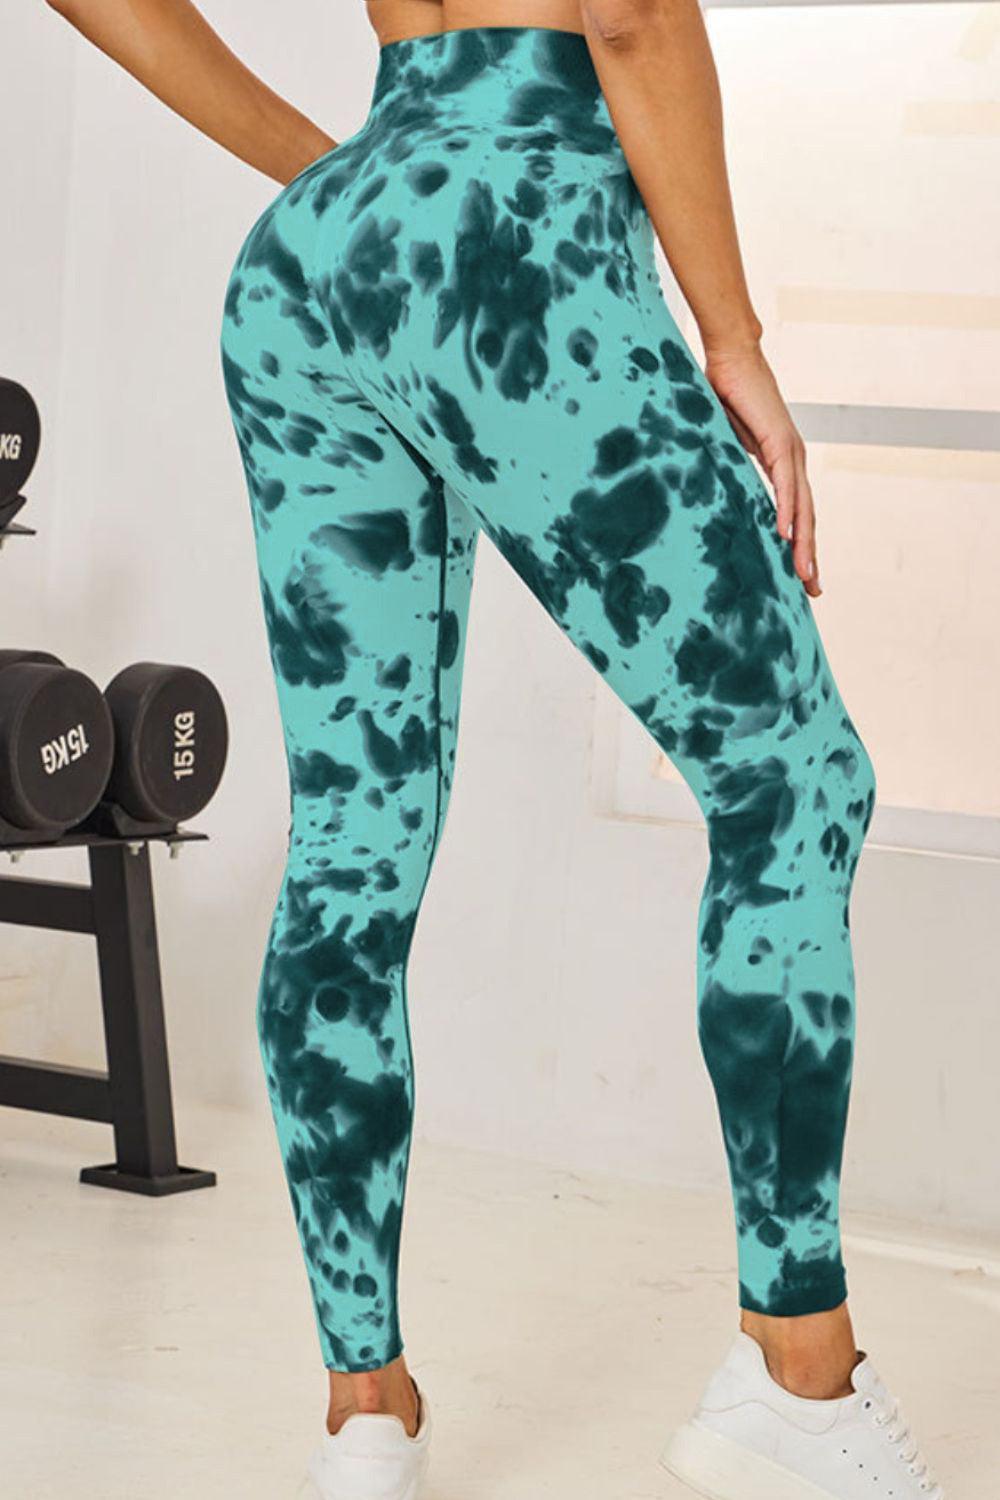 a woman in a green and black tie dye leggings